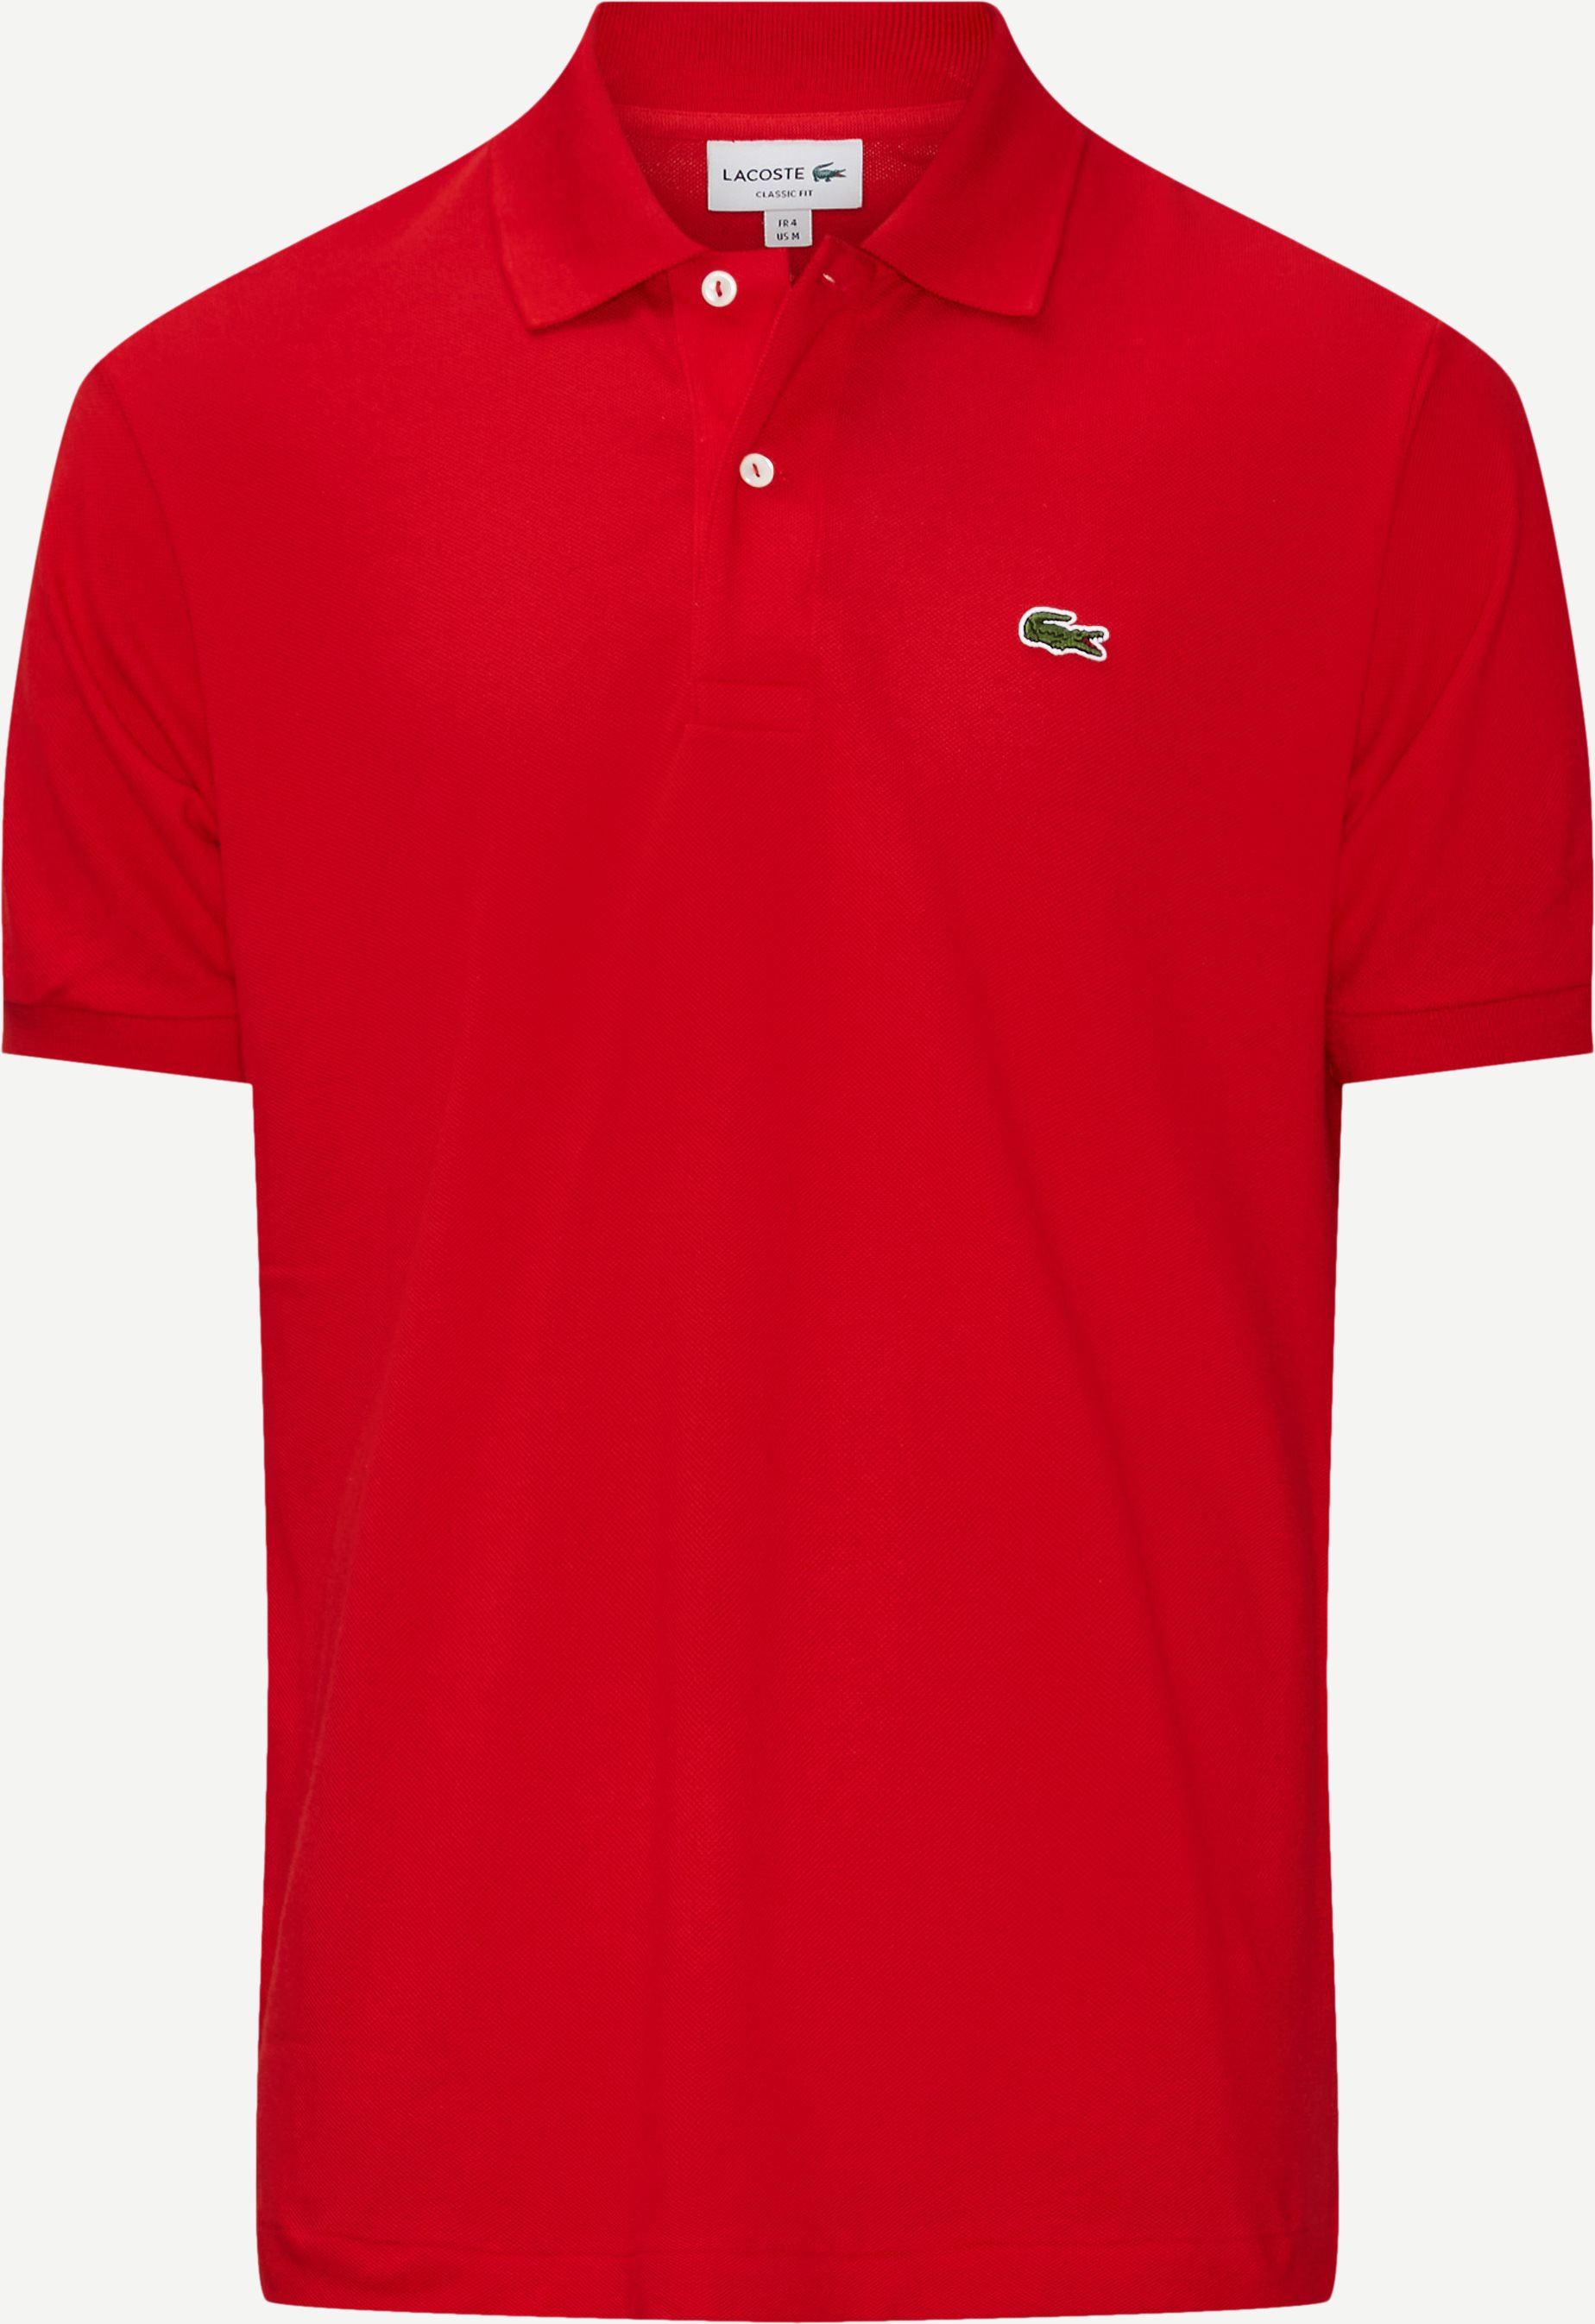 T-shirts - Classic fit - Red